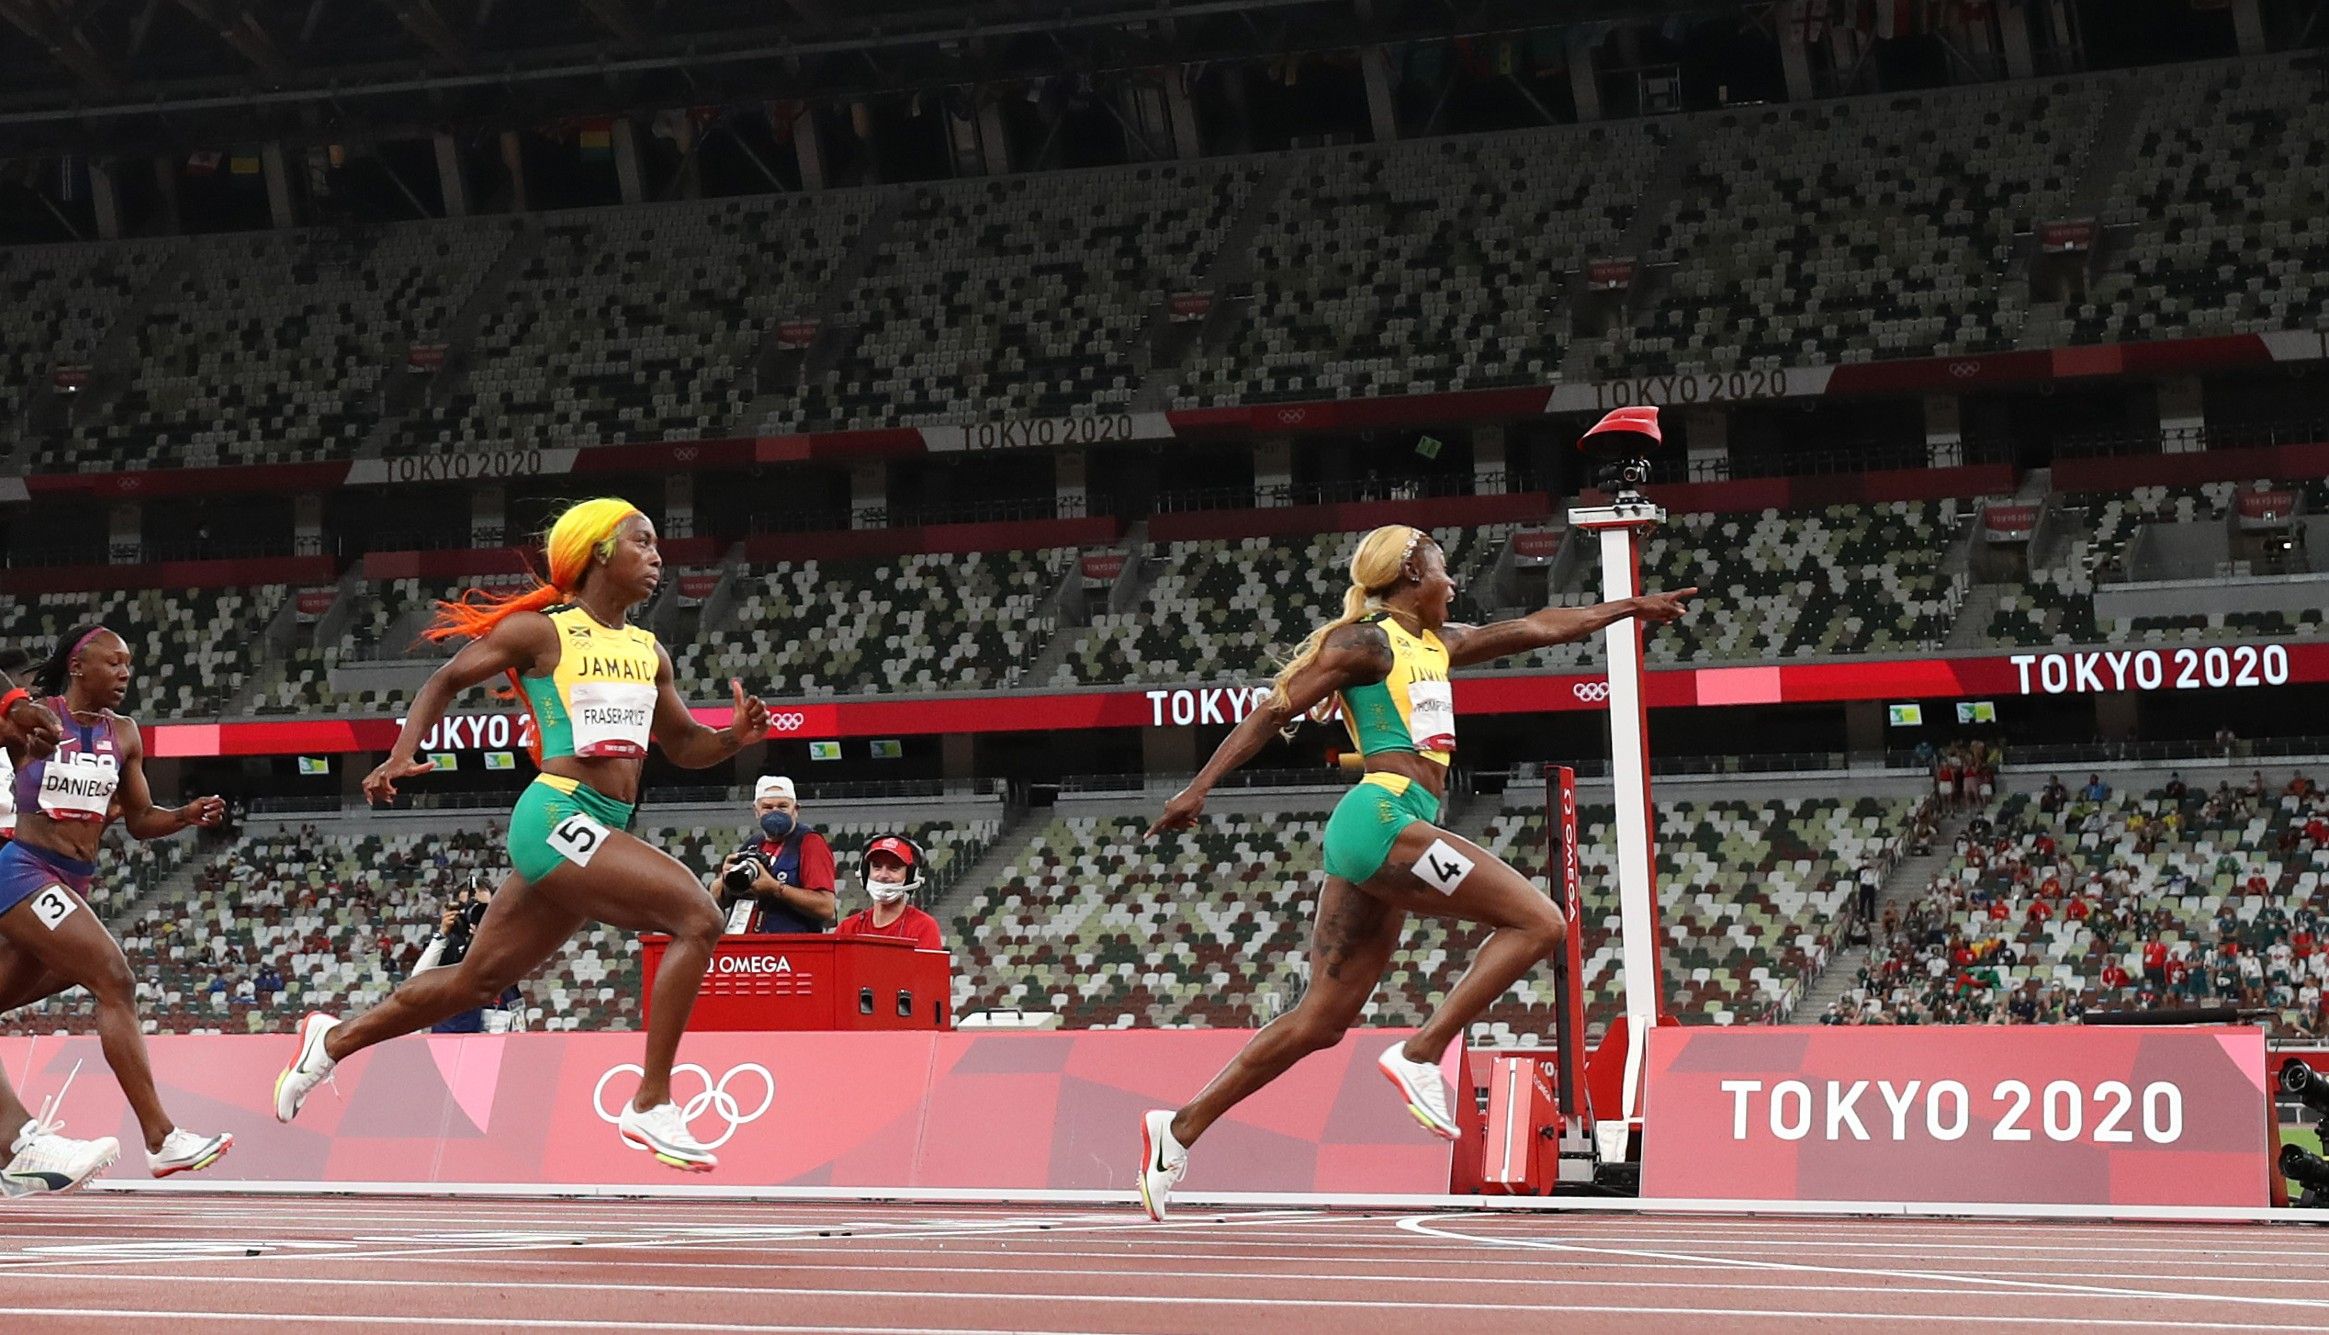 Elaine Thompson-Herah and Shelly-Ann Fraser-Pryce at the Tokyo 2020 Olympic Games